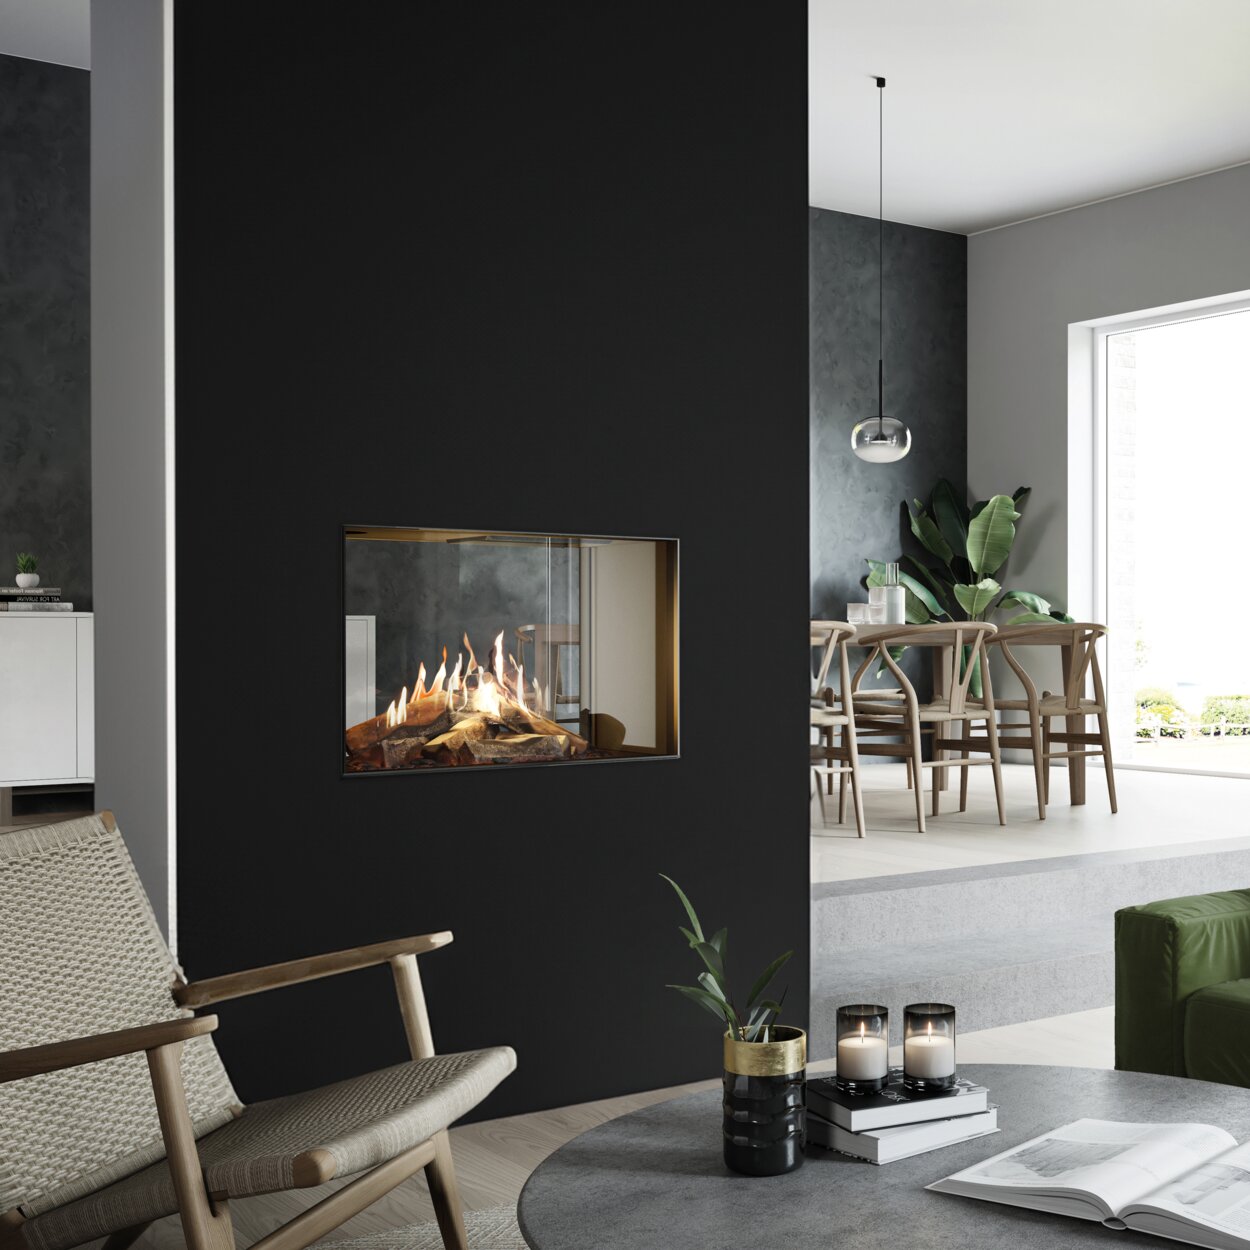 VISIO 70 T gas fireplace stands as a tunnel in a black partition wall, structuring the living space between the kitchen, dining room and living room